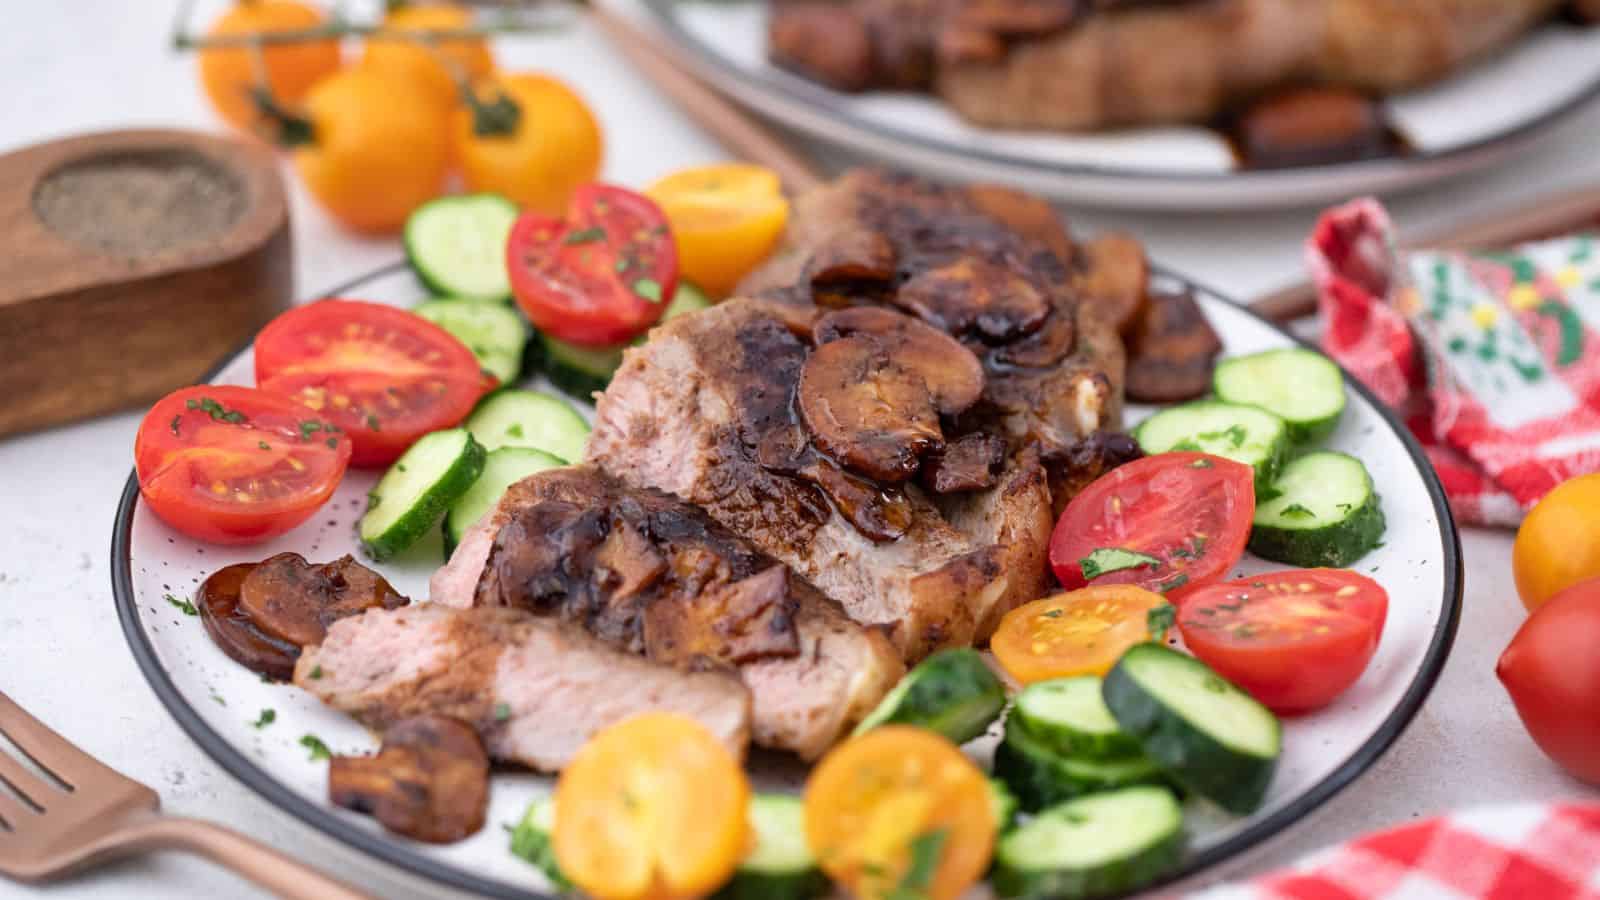 A plate with steak, tomatoes and cucumbers on it.